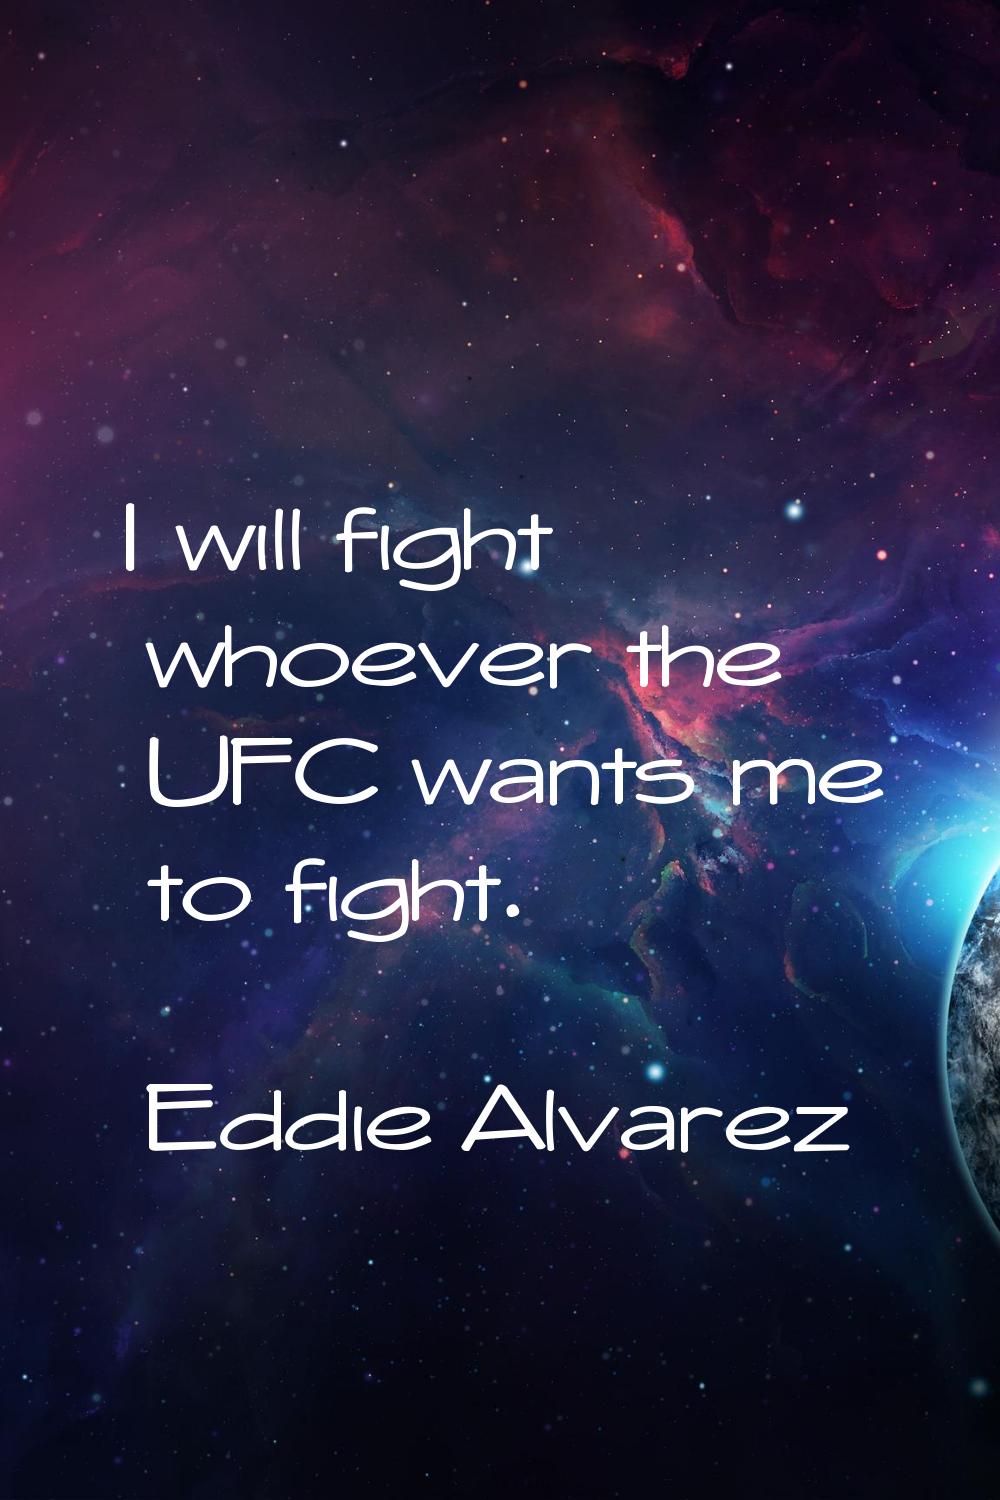 I will fight whoever the UFC wants me to fight.